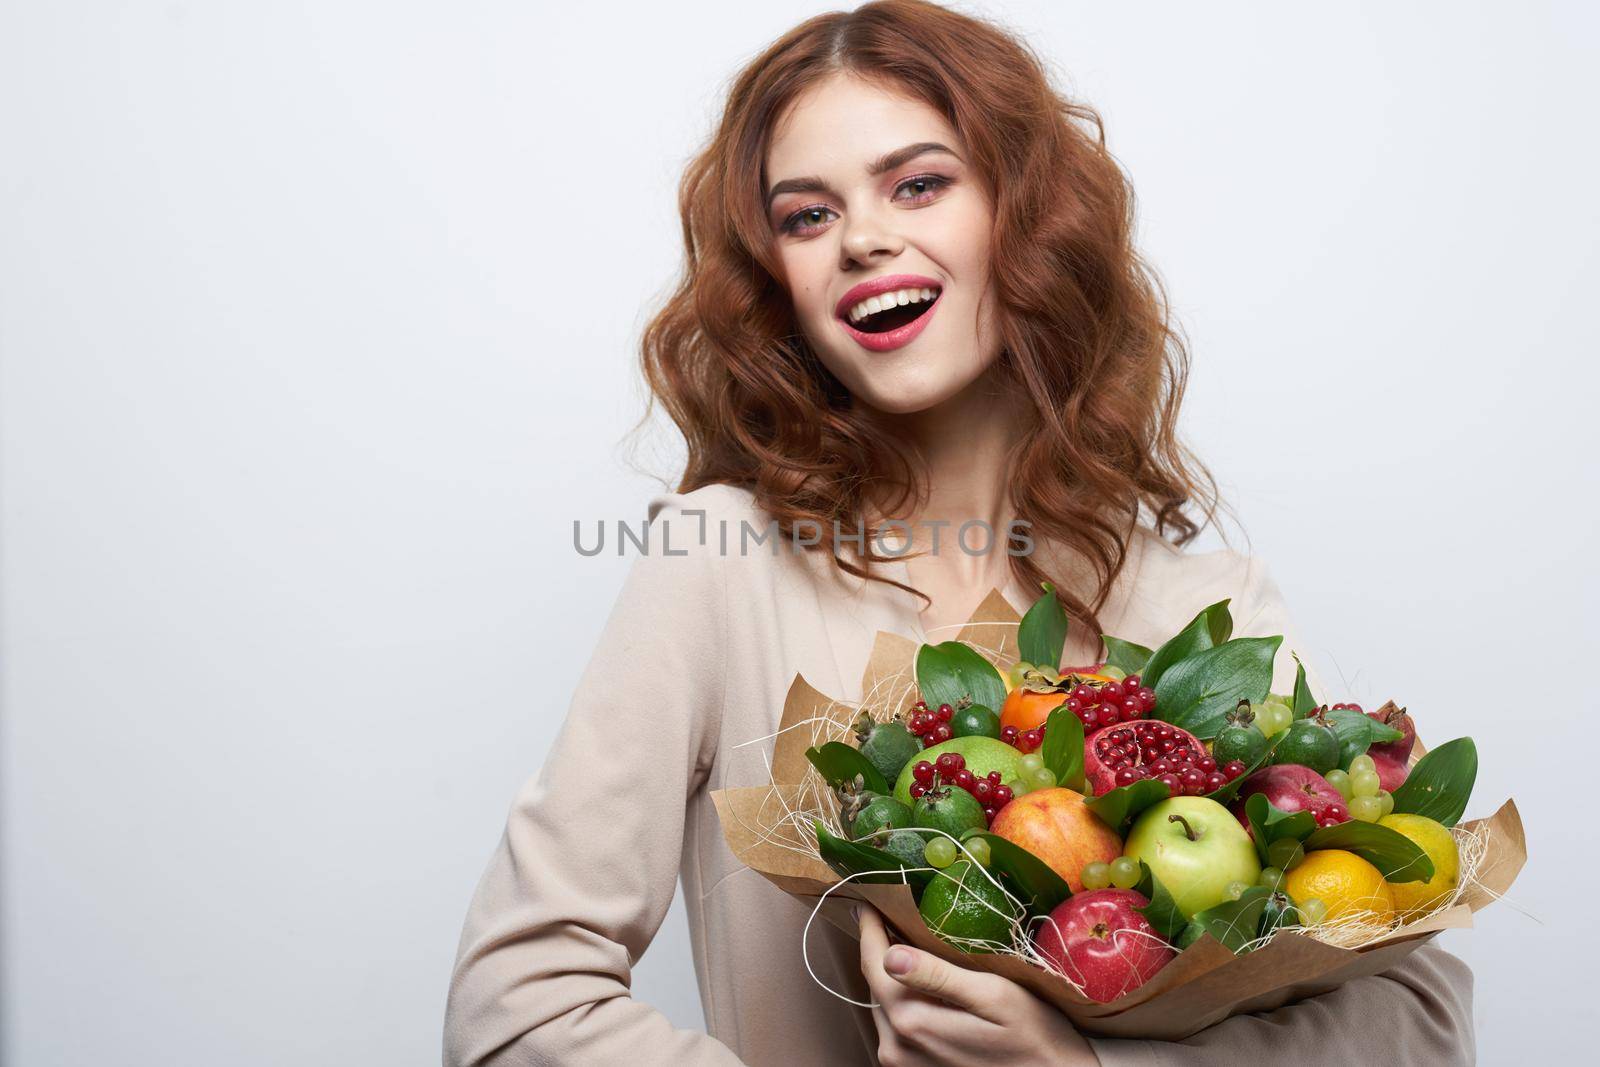 portrait of a woman fun posing fruit bouquet vitamins isolated background. High quality photo